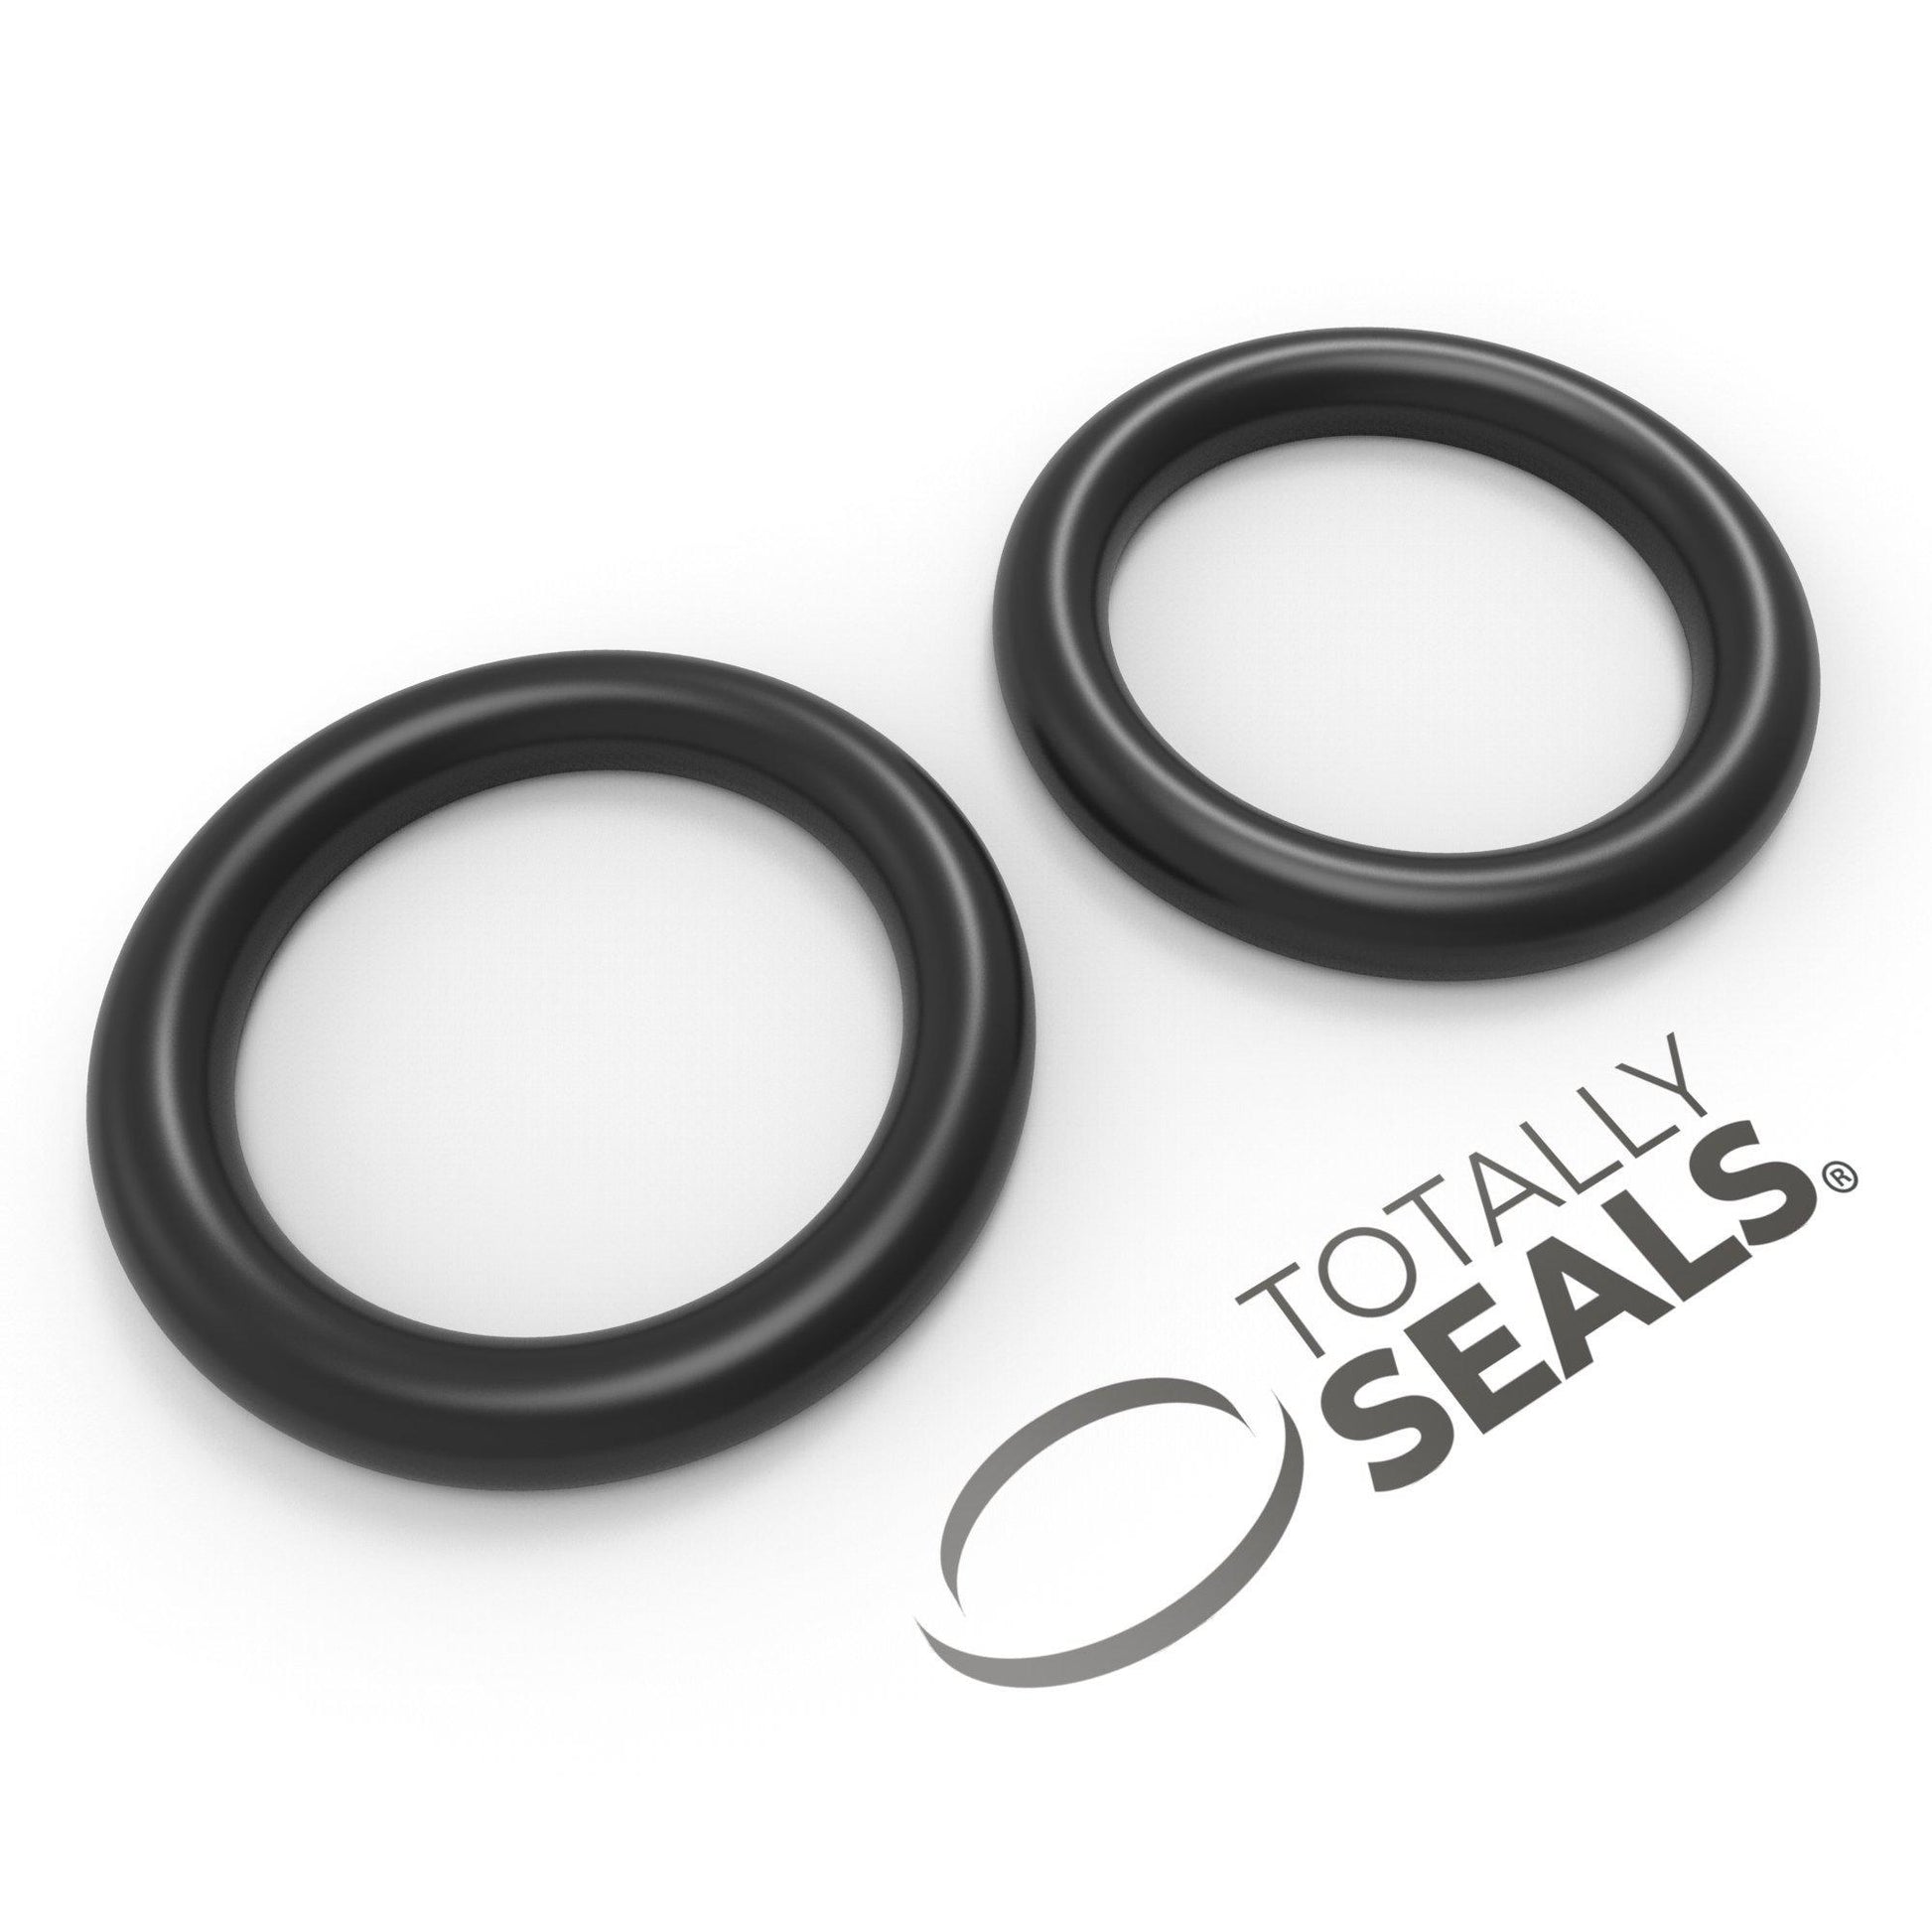 27mm x 1.5mm (30mm OD) Nitrile O-Rings - Totally Seals®